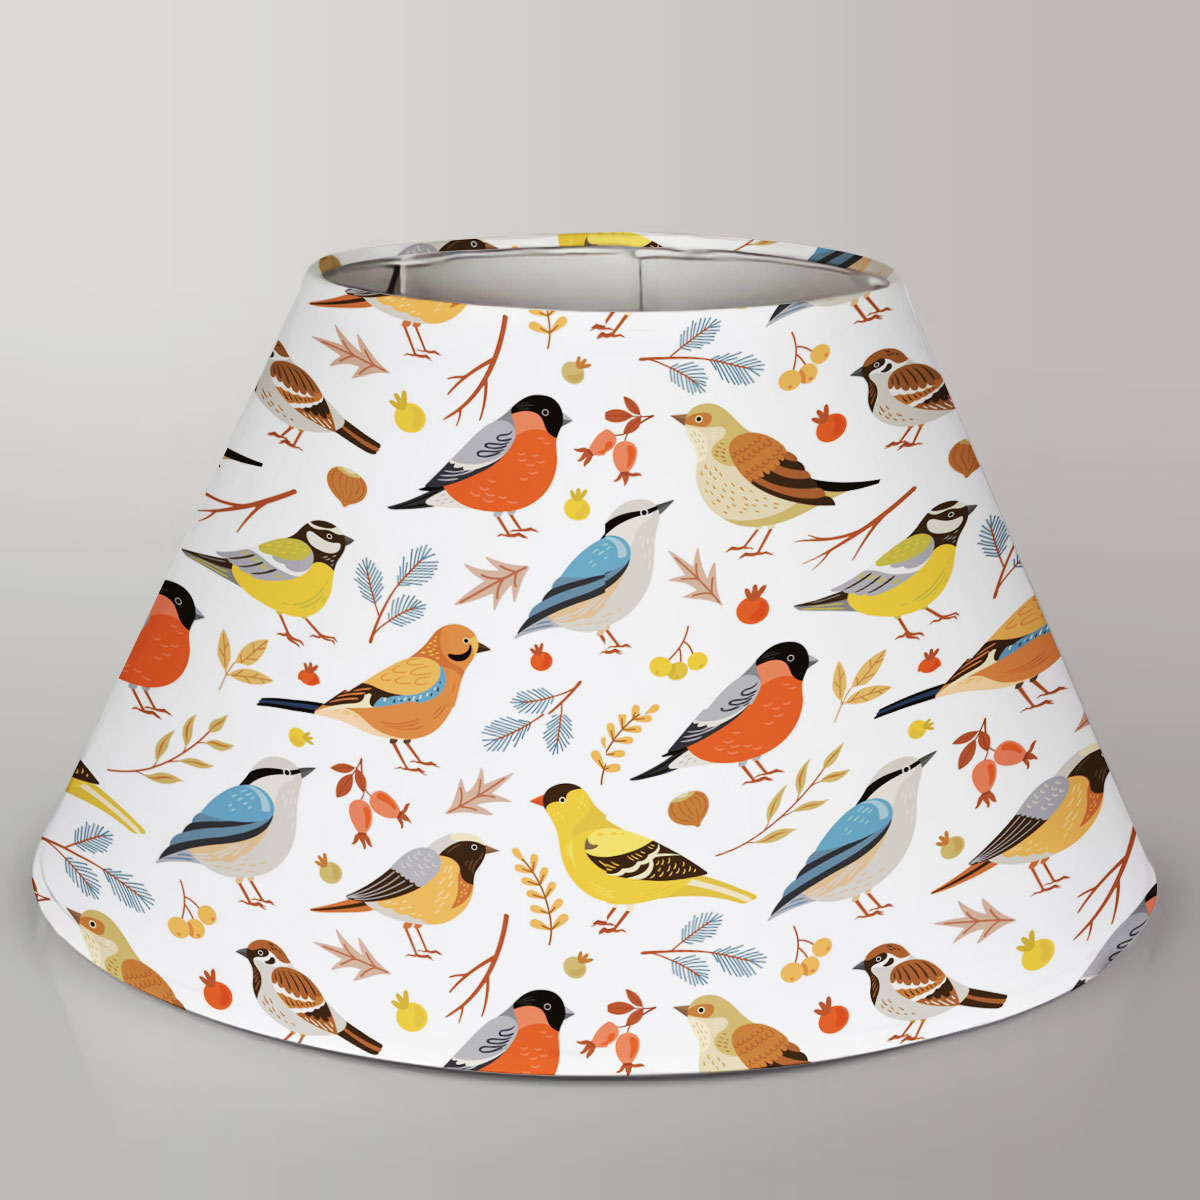 Coon Berries Finch Lamp Cover